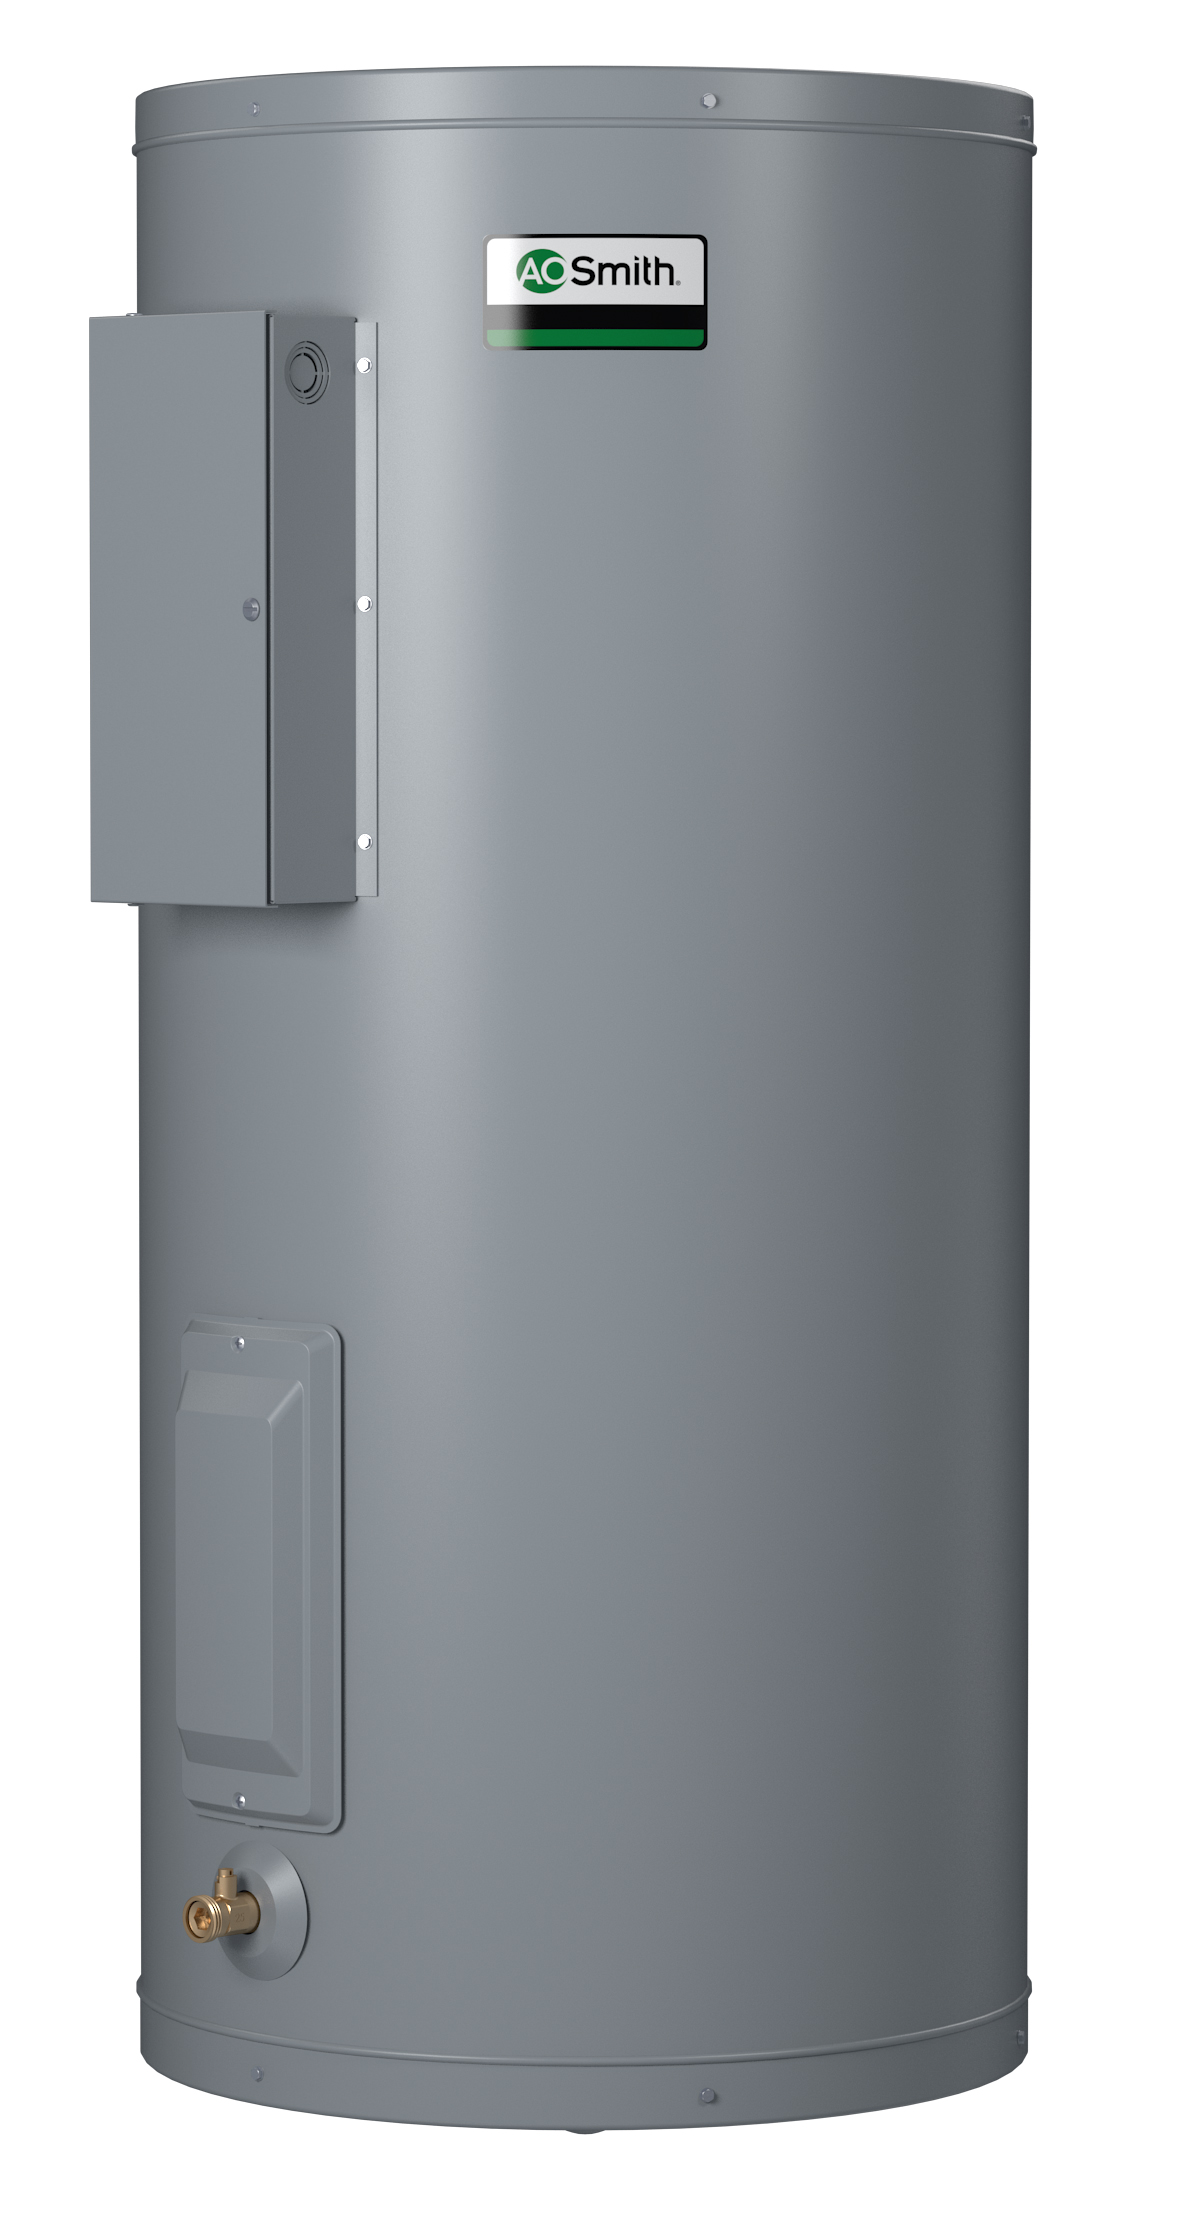 AO SMITH DEN-120D: 120 GALLONS, 2.0KW, 240 VOLT, 1 PHASE, (2-2000 WATT ELEMENTS, NON-SIMULTANEOUS WIRING), DURA-POWER, LIGHT DUTY COMMERCIAL ELECTRIC WATER HEATER